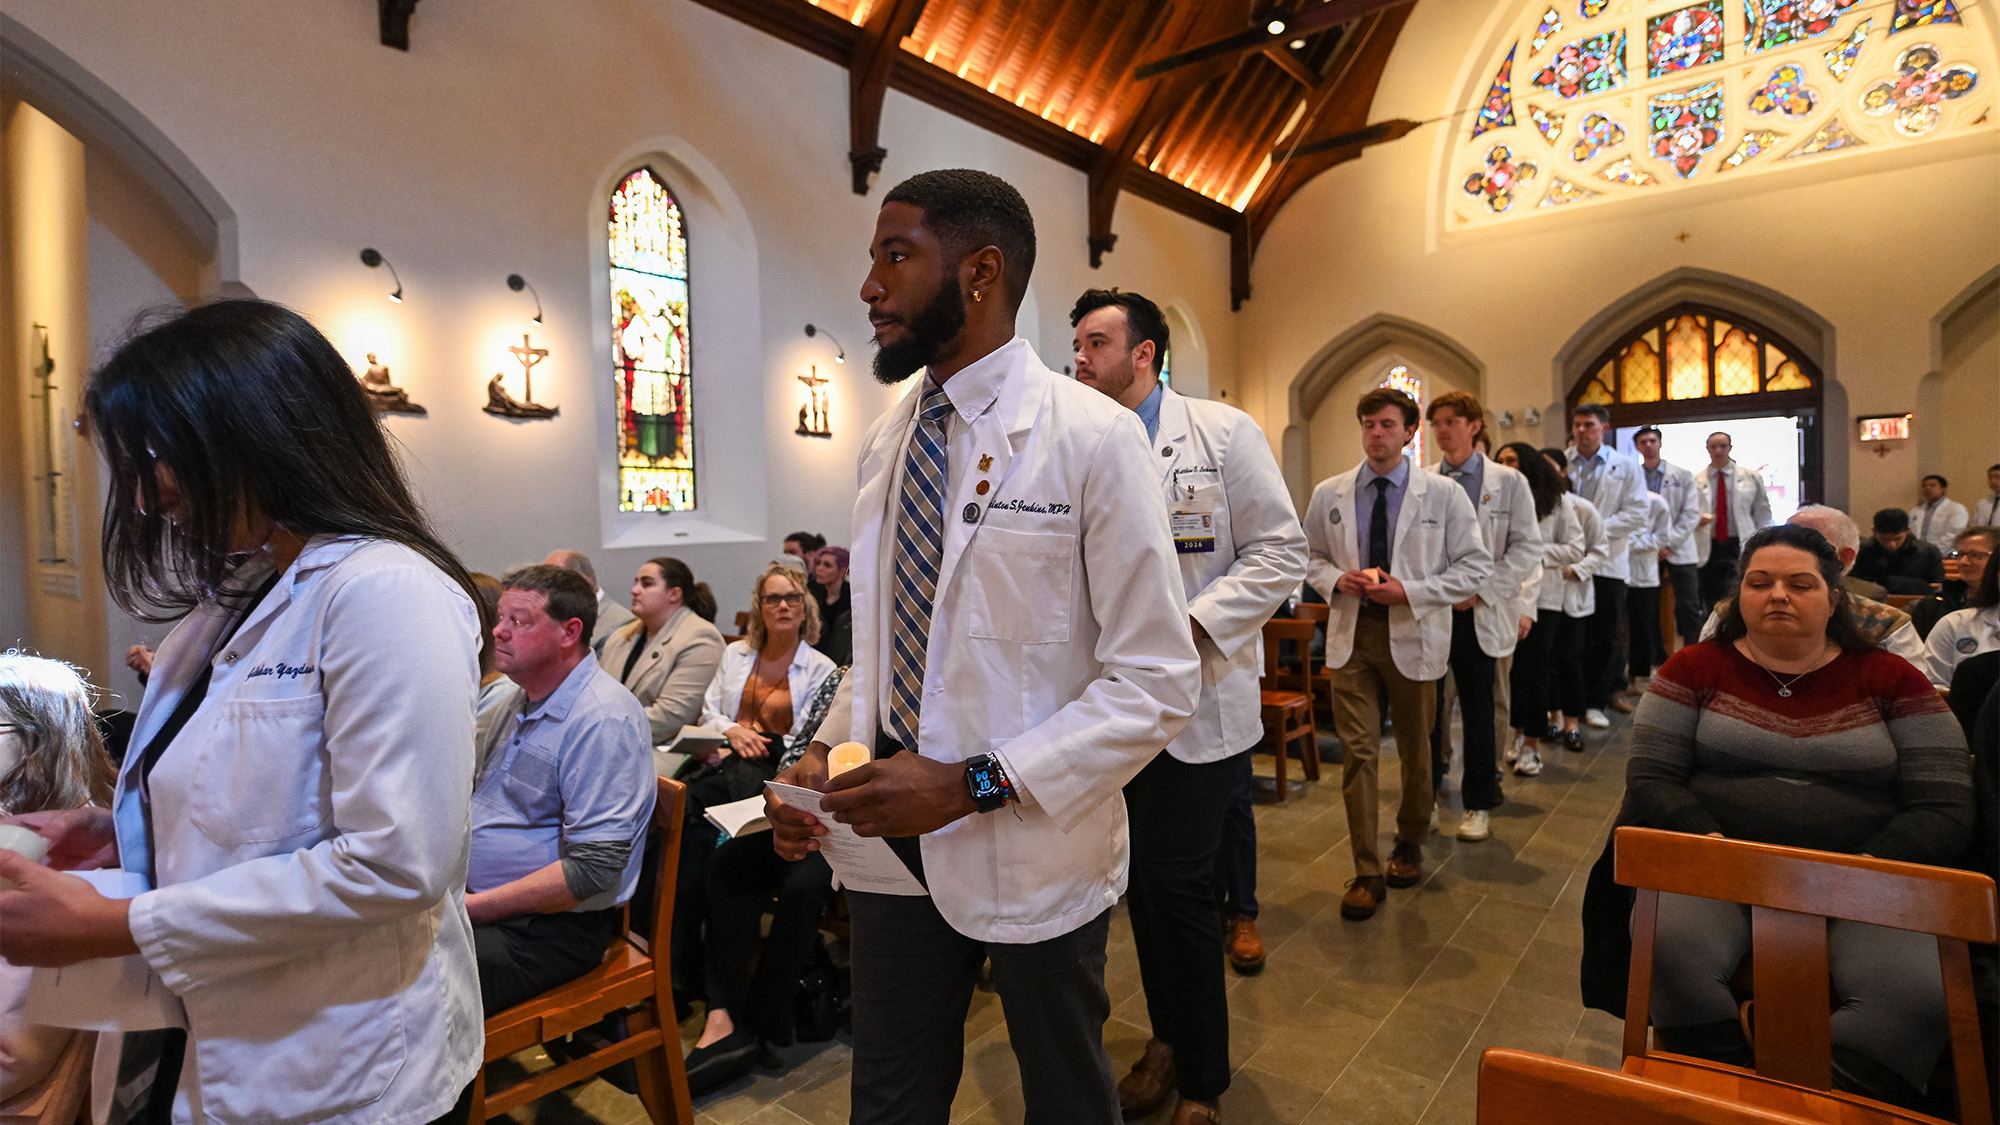 Students in white coats file into Dahlgren Chapel while congregants sit in pews around them